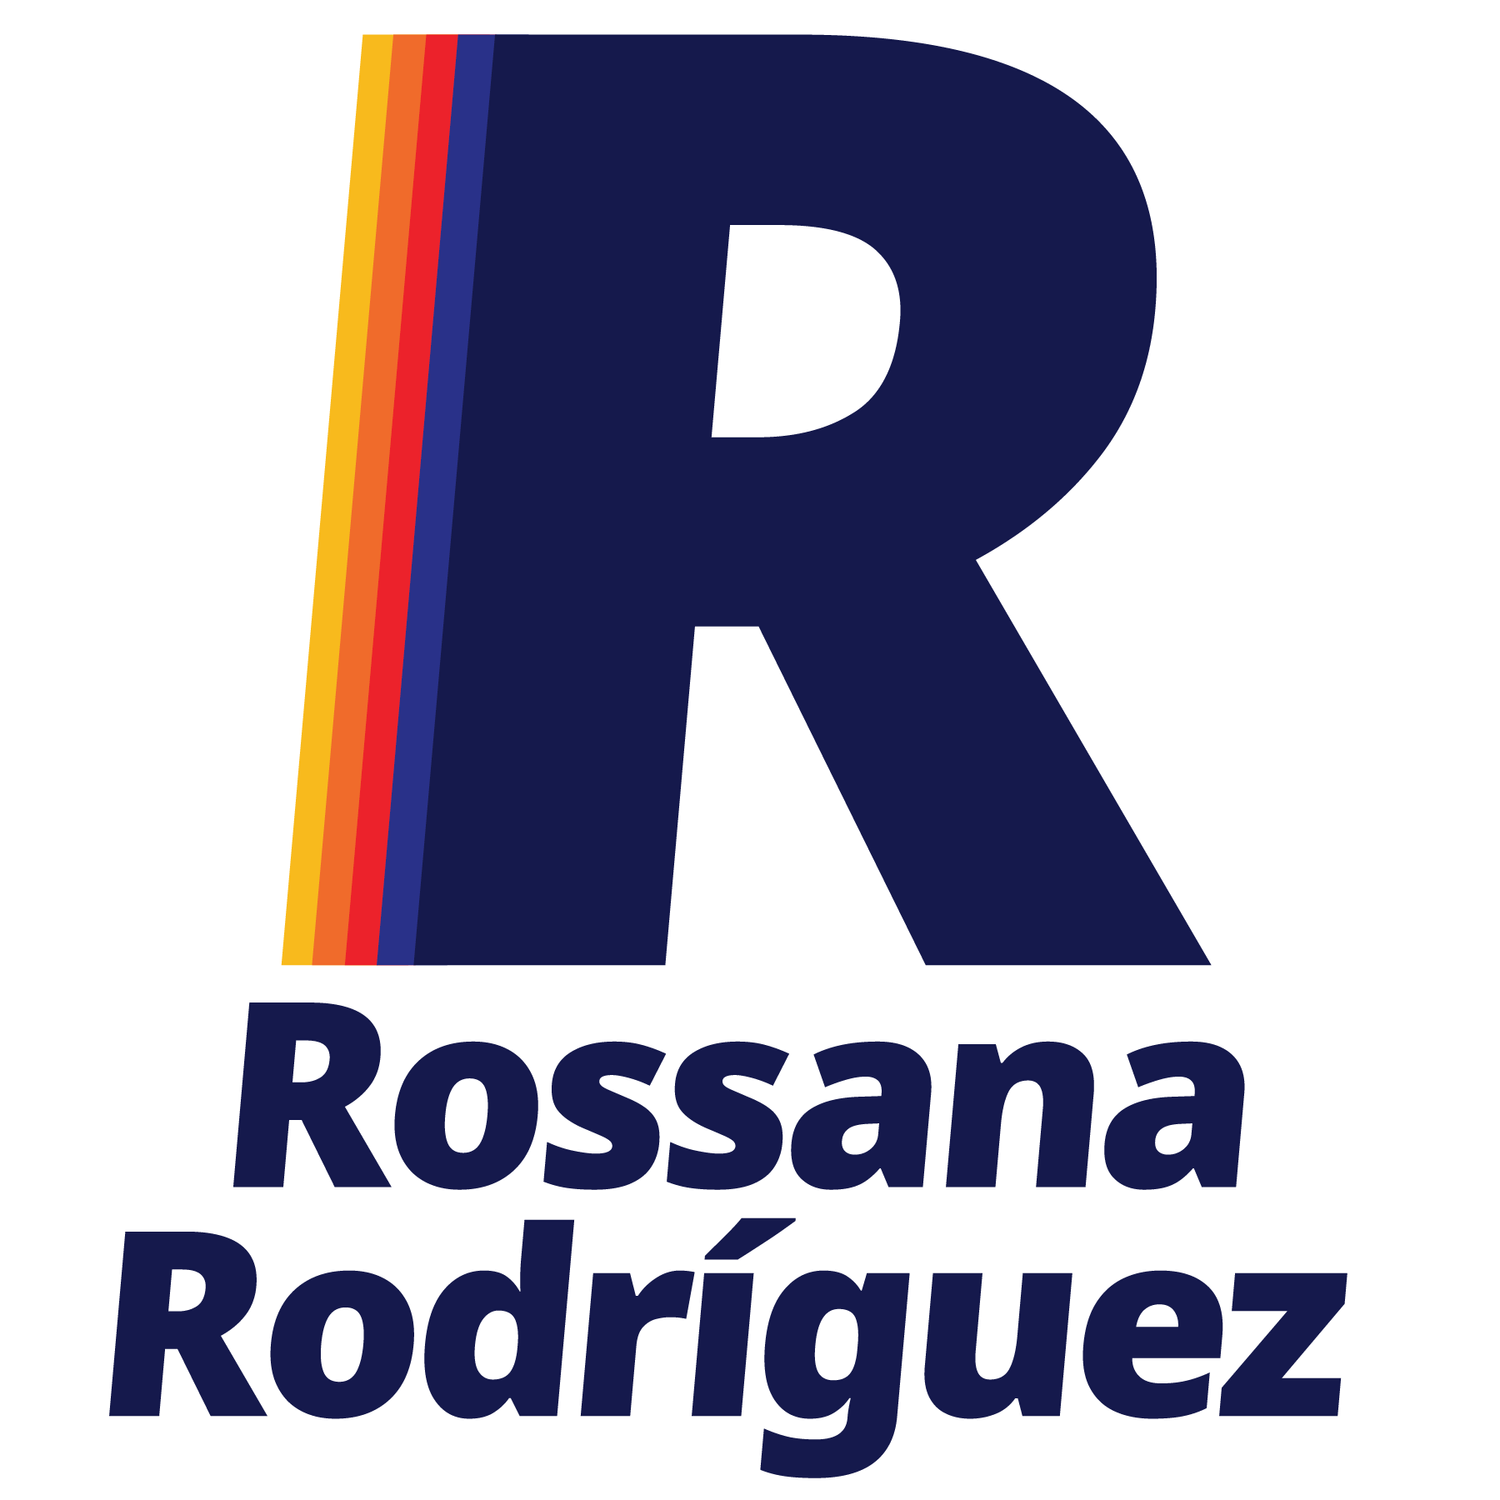 Rossana Rodríguez for 33rd Ward Committeeperson